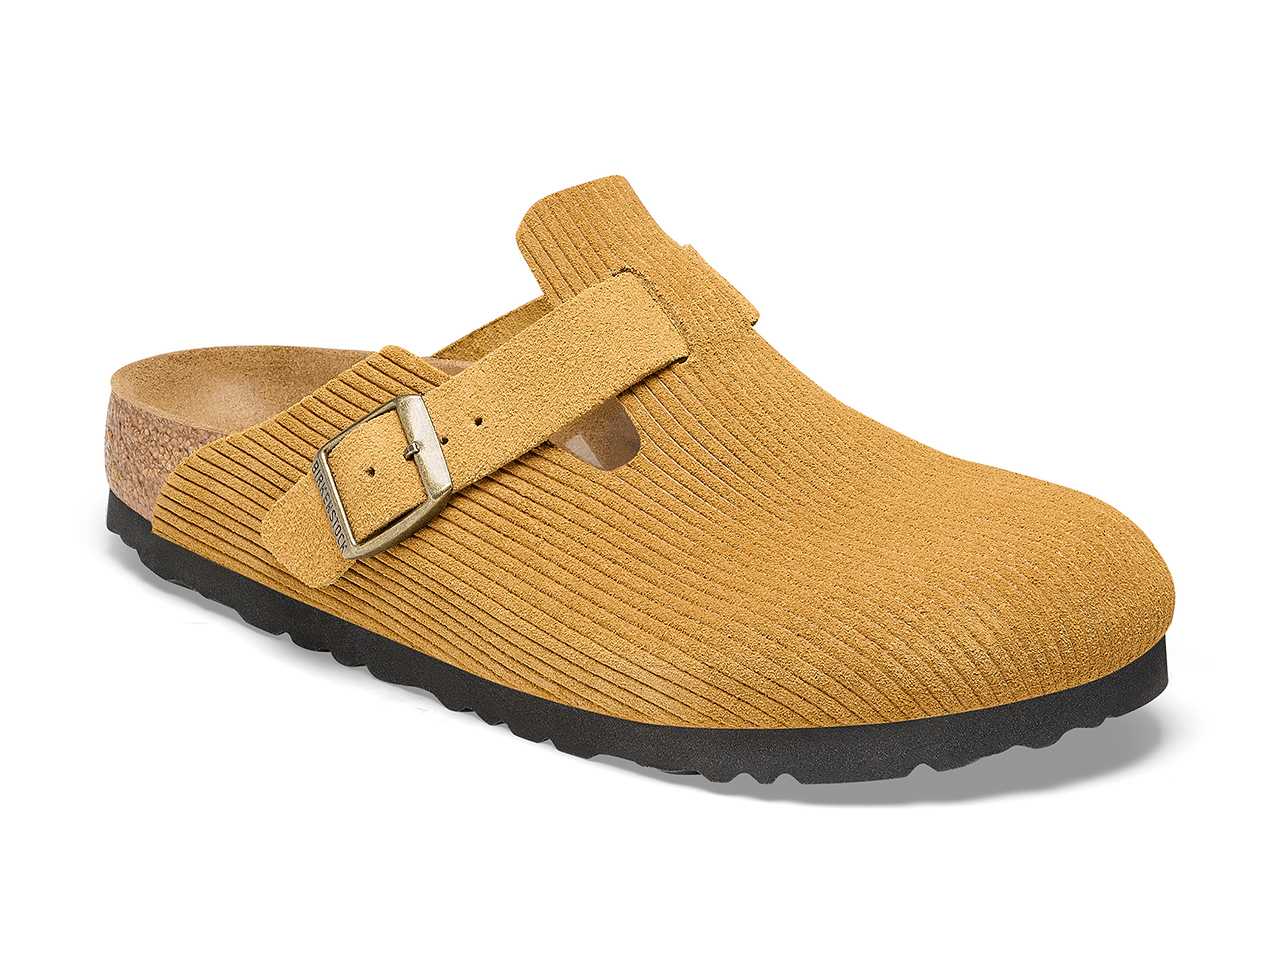 A side profile of yellow corduroy clogs from Birkenstock.